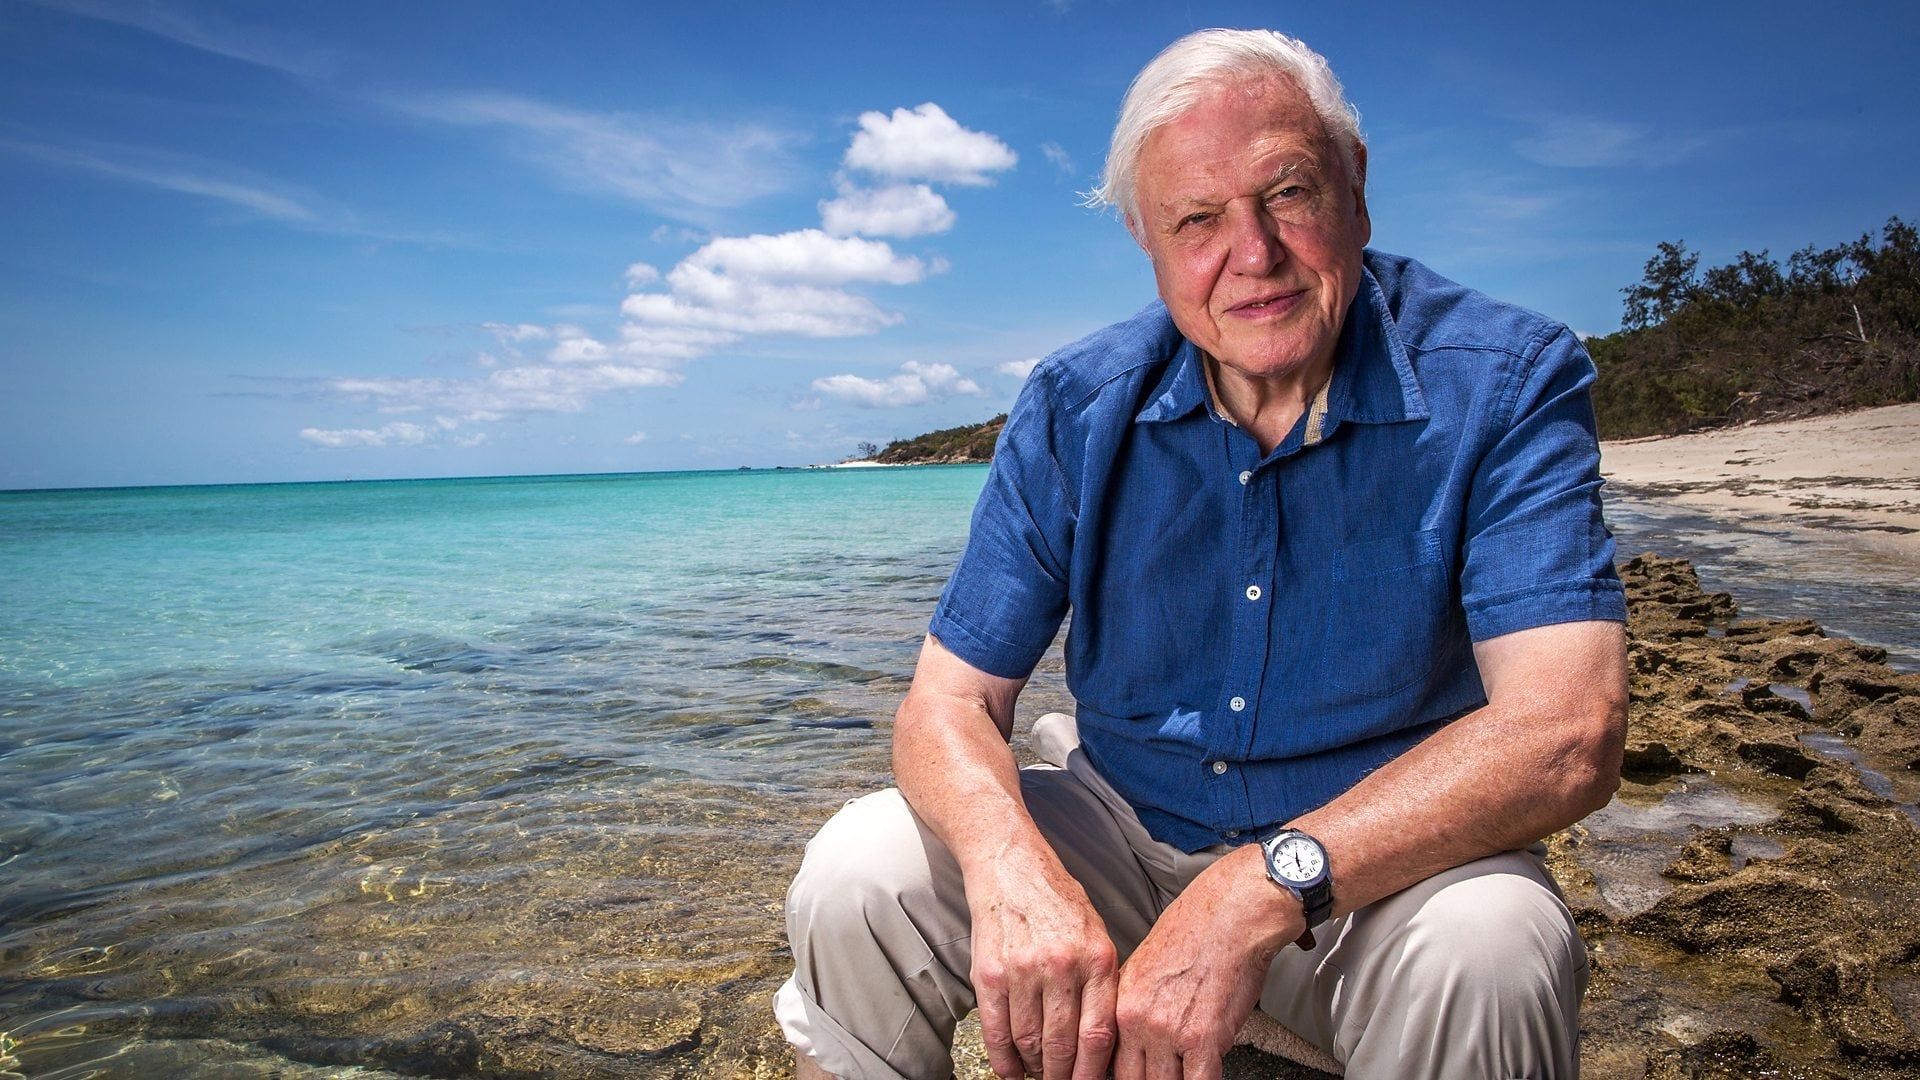 Great Barrier Reef with David Attenborough background